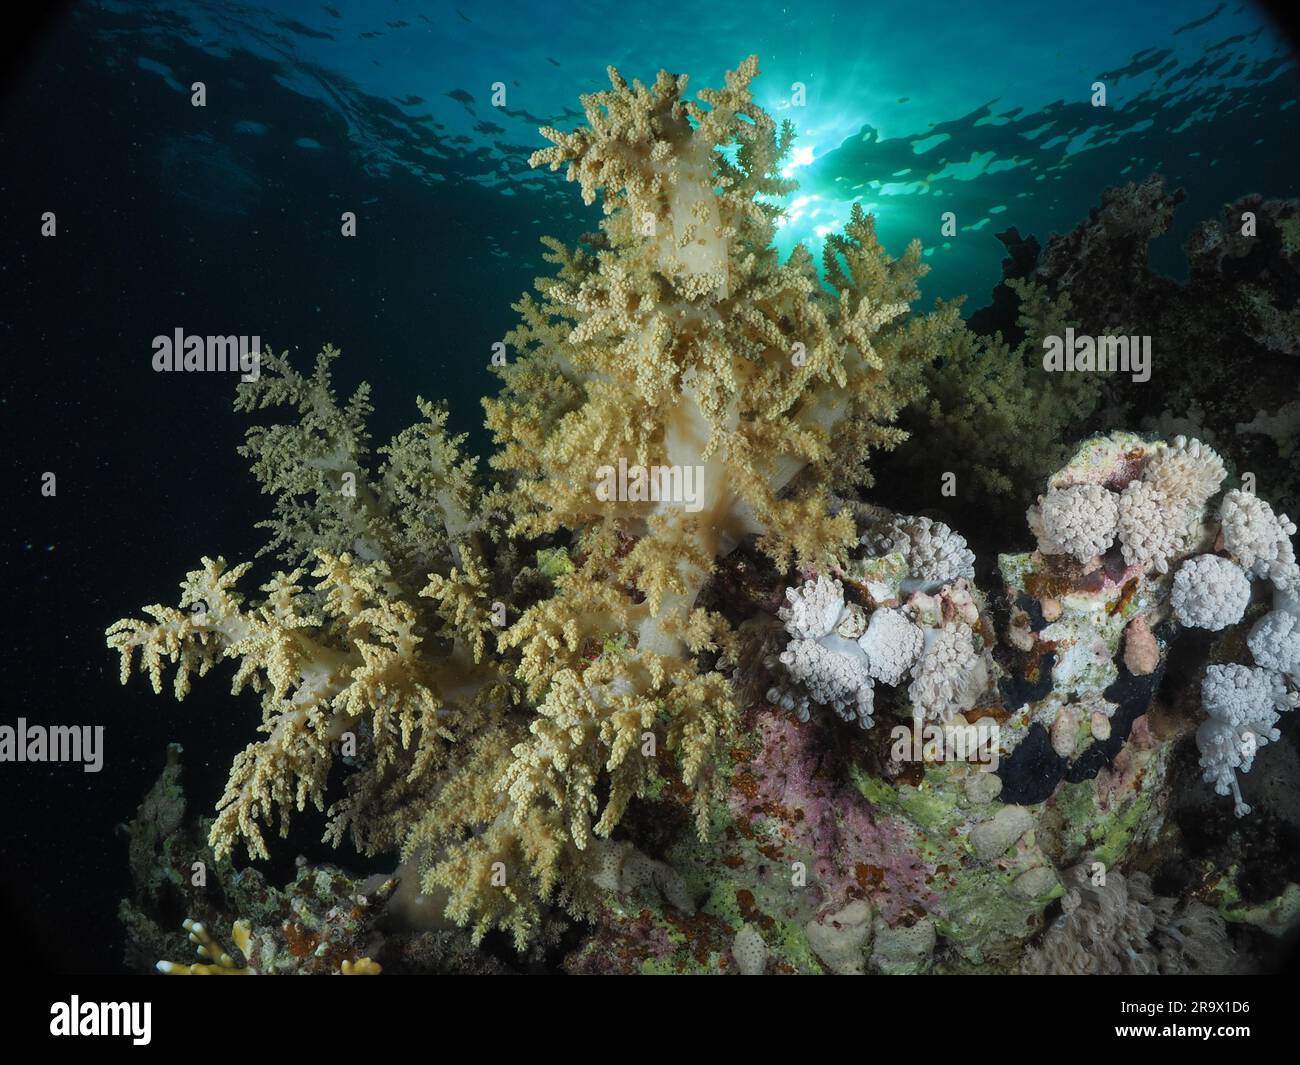 Broccoli tree (Litophyton arboreum) in the evening light, sun rays. Dive site House Reef, Mangrove Bay, El Quesir, Red Sea, Egypt Stock Photo